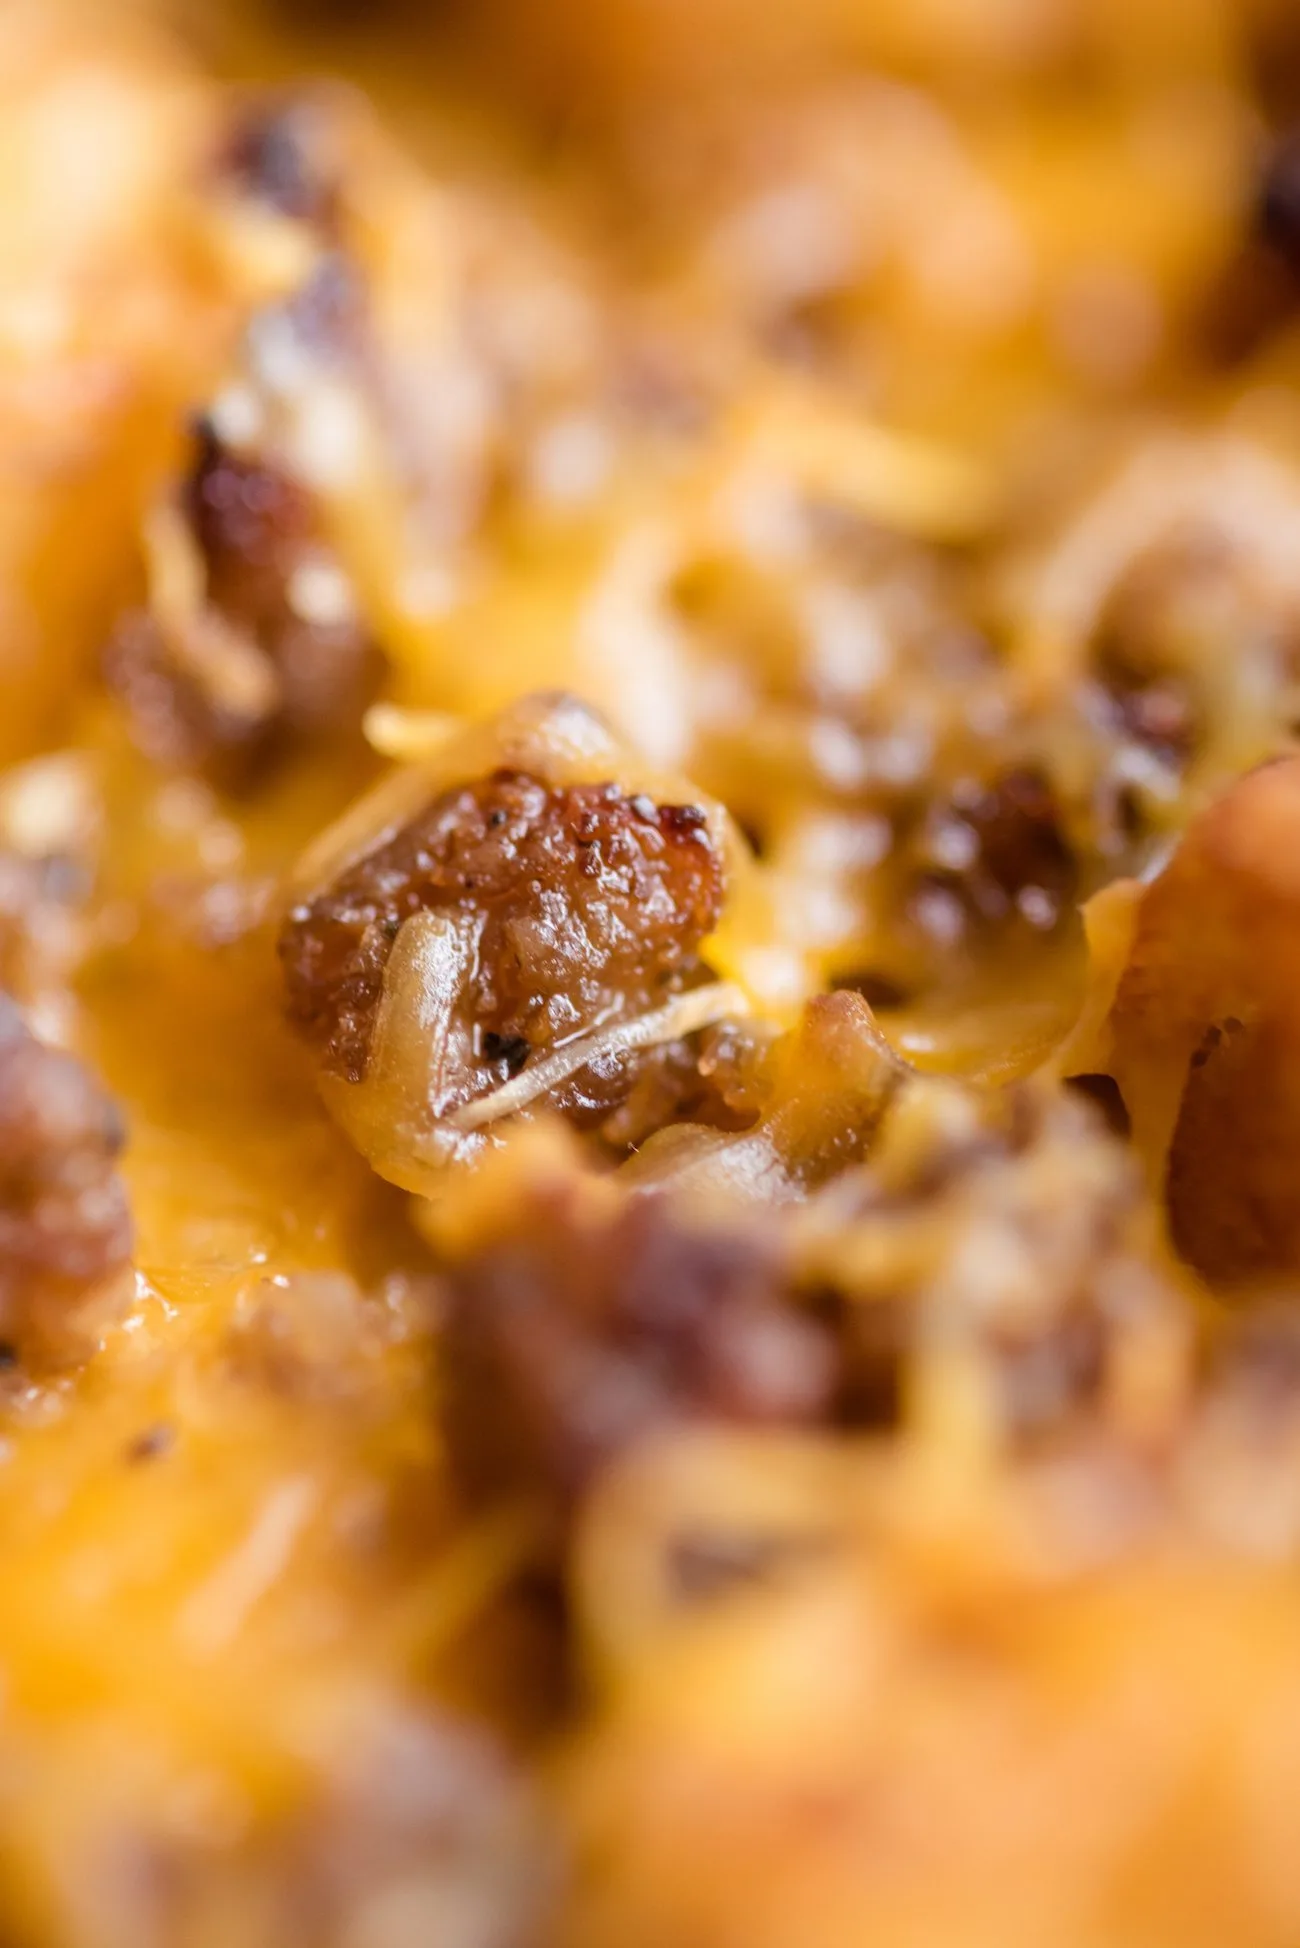 Last Minute Entertaining Tips | Easy make ahead sausage breakfast casserole from @cydconverse